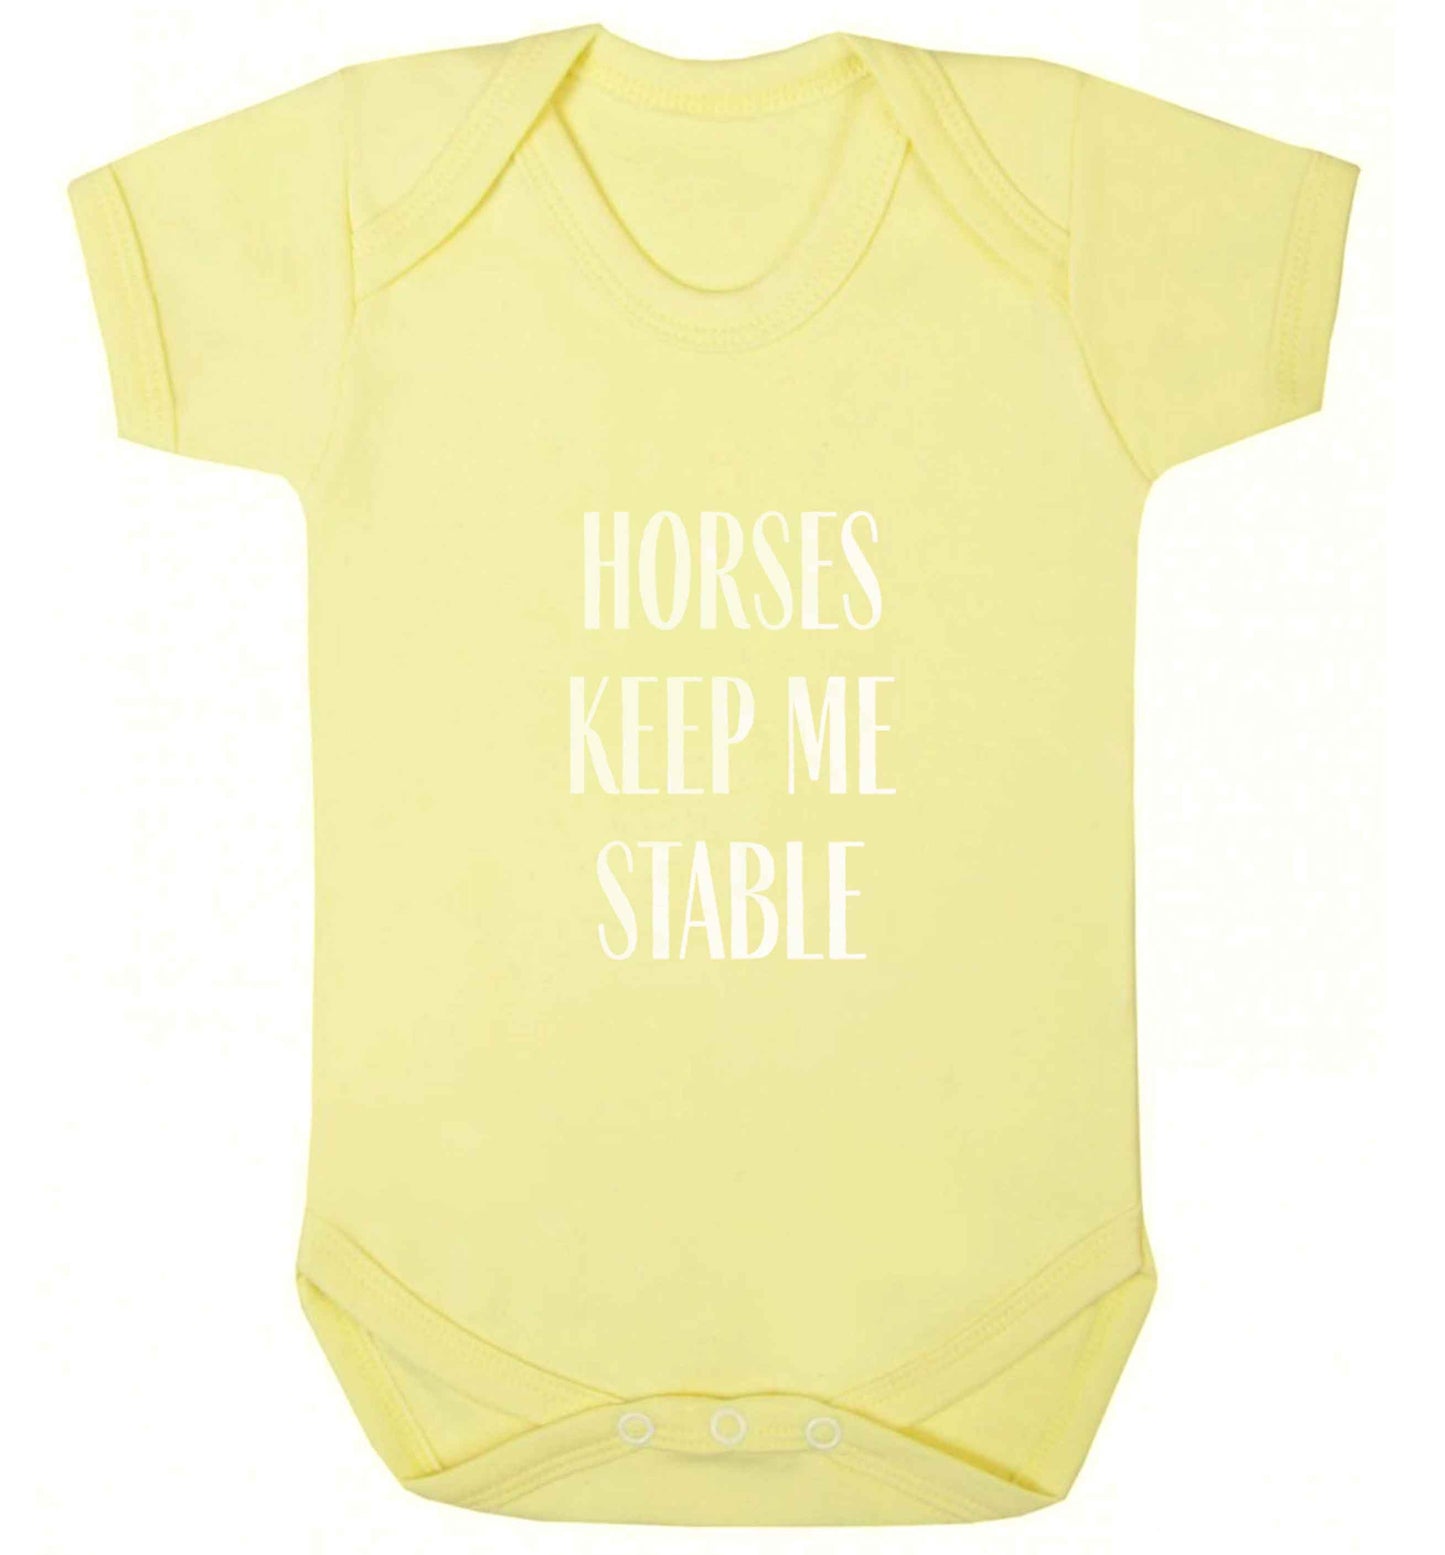 Horses keep me stable baby vest pale yellow 18-24 months